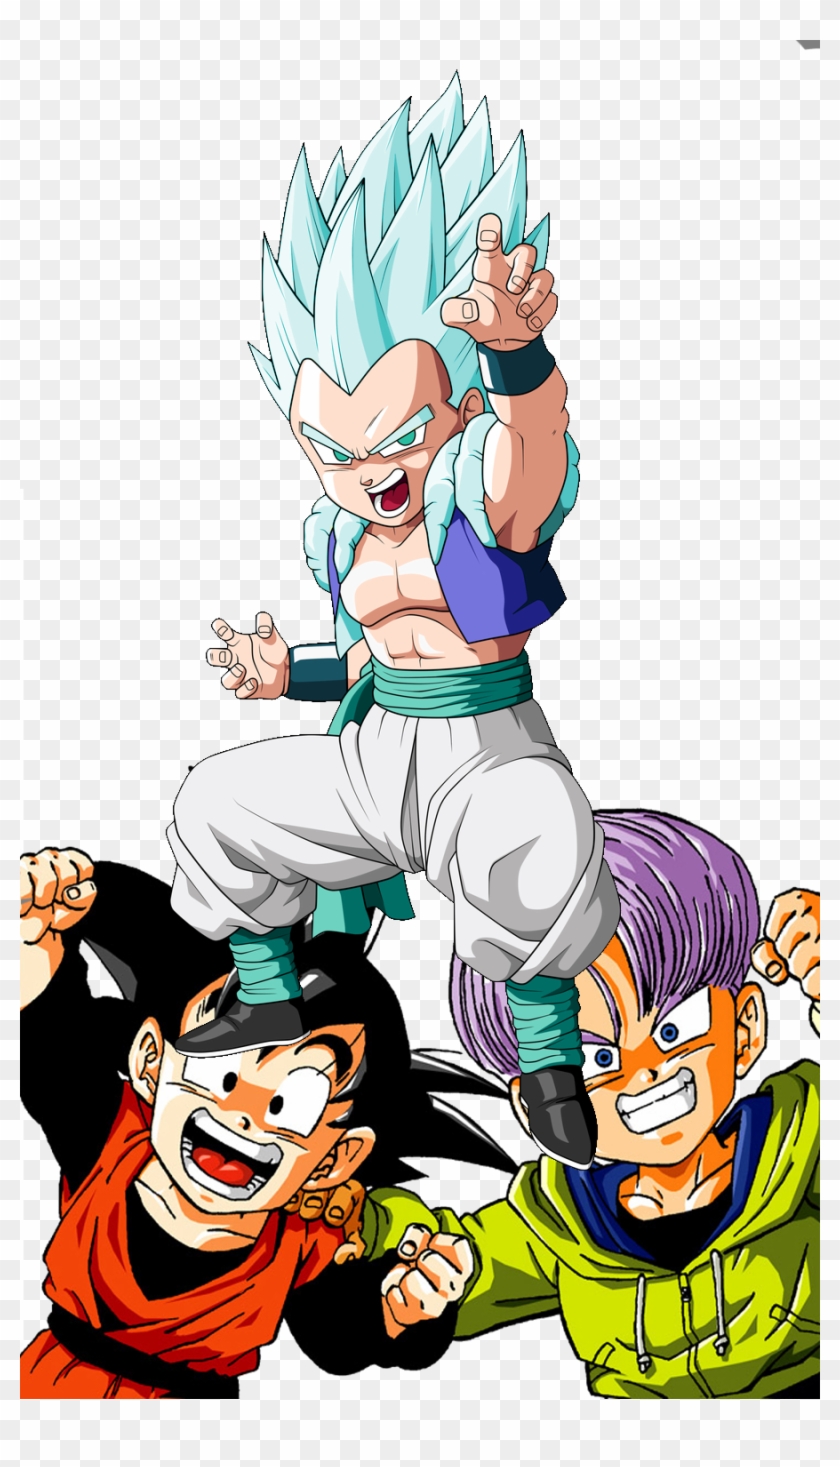 Trunks And Gotens Fusion Dance Dragon - Alternate Fusion Goten And Trunks Clipart #1435344